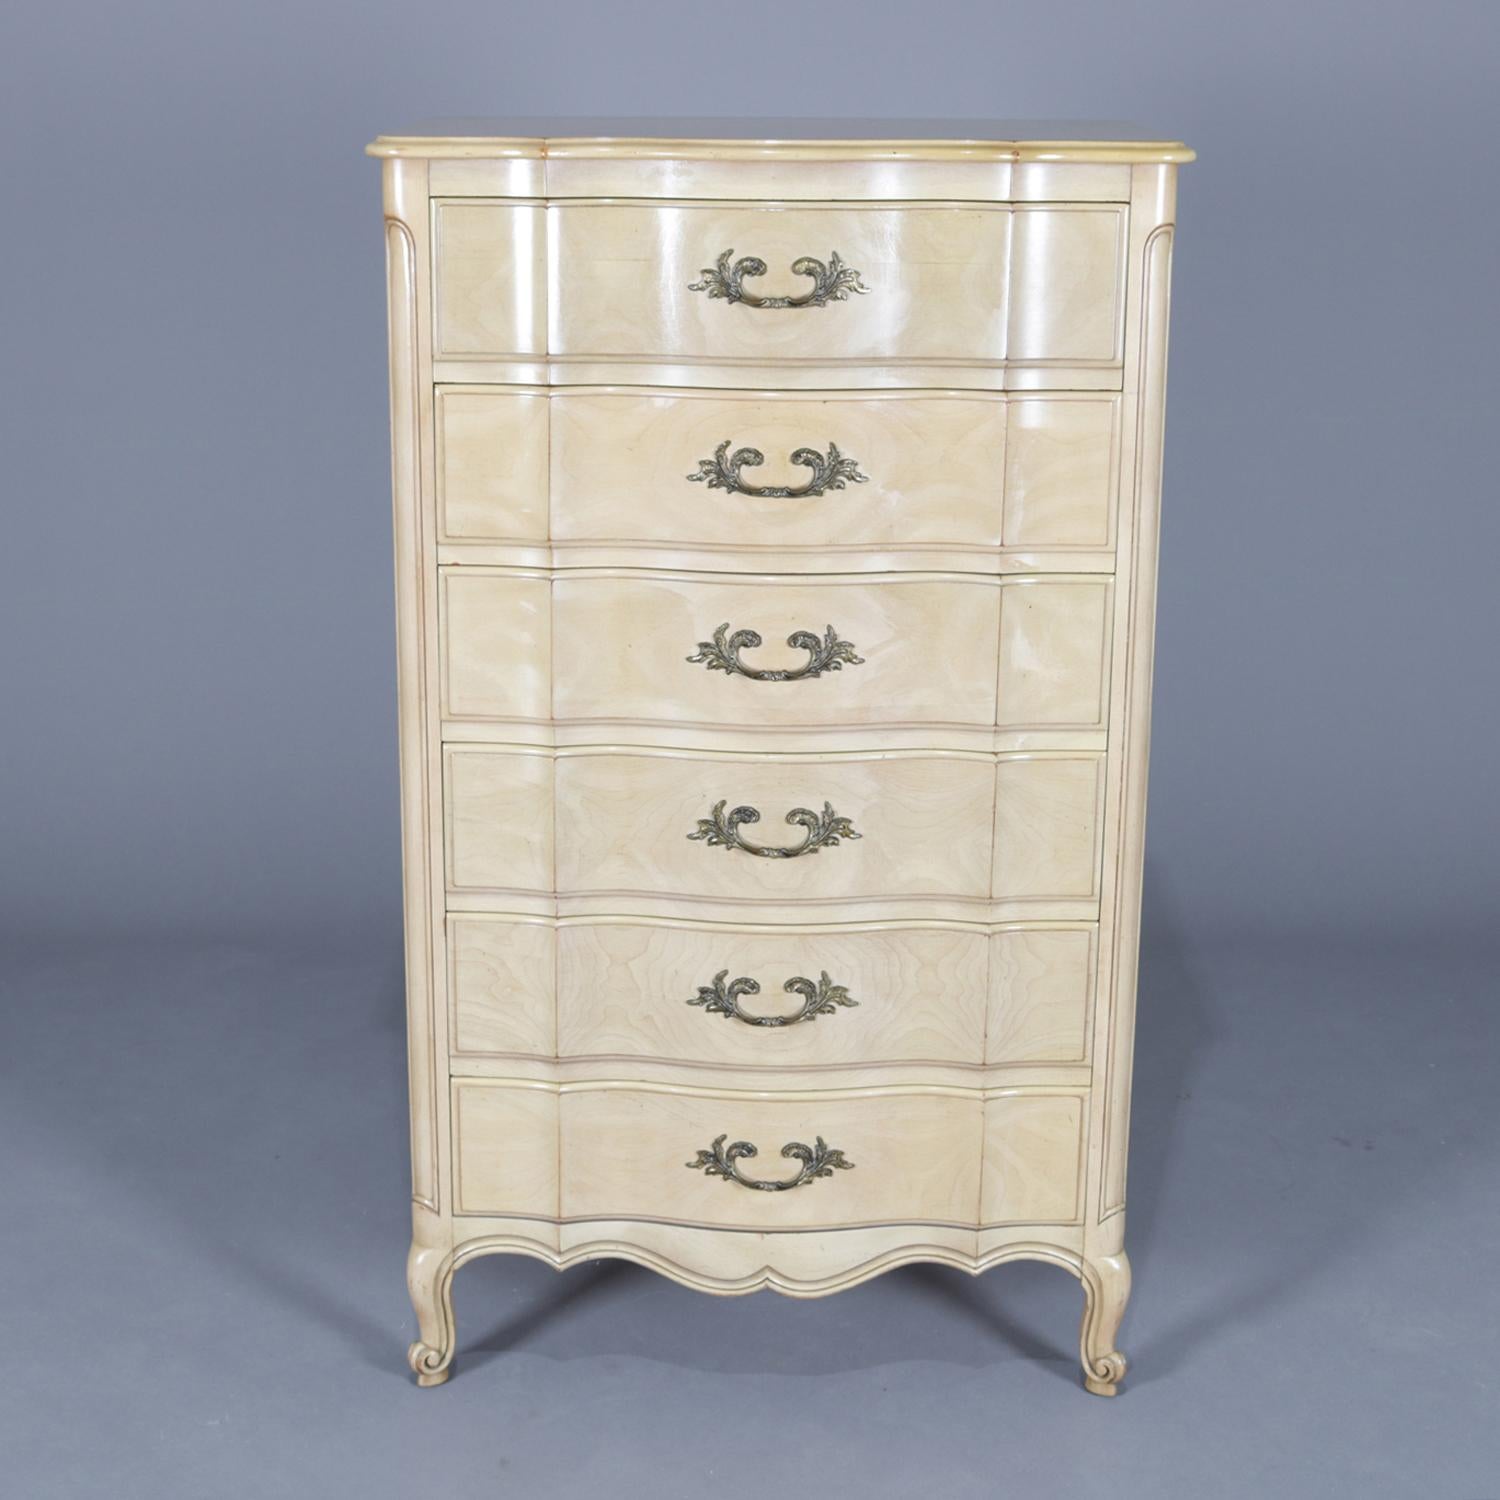 American French Provincial Carved & Painted High Chest by John Widdicomb, 20th Century